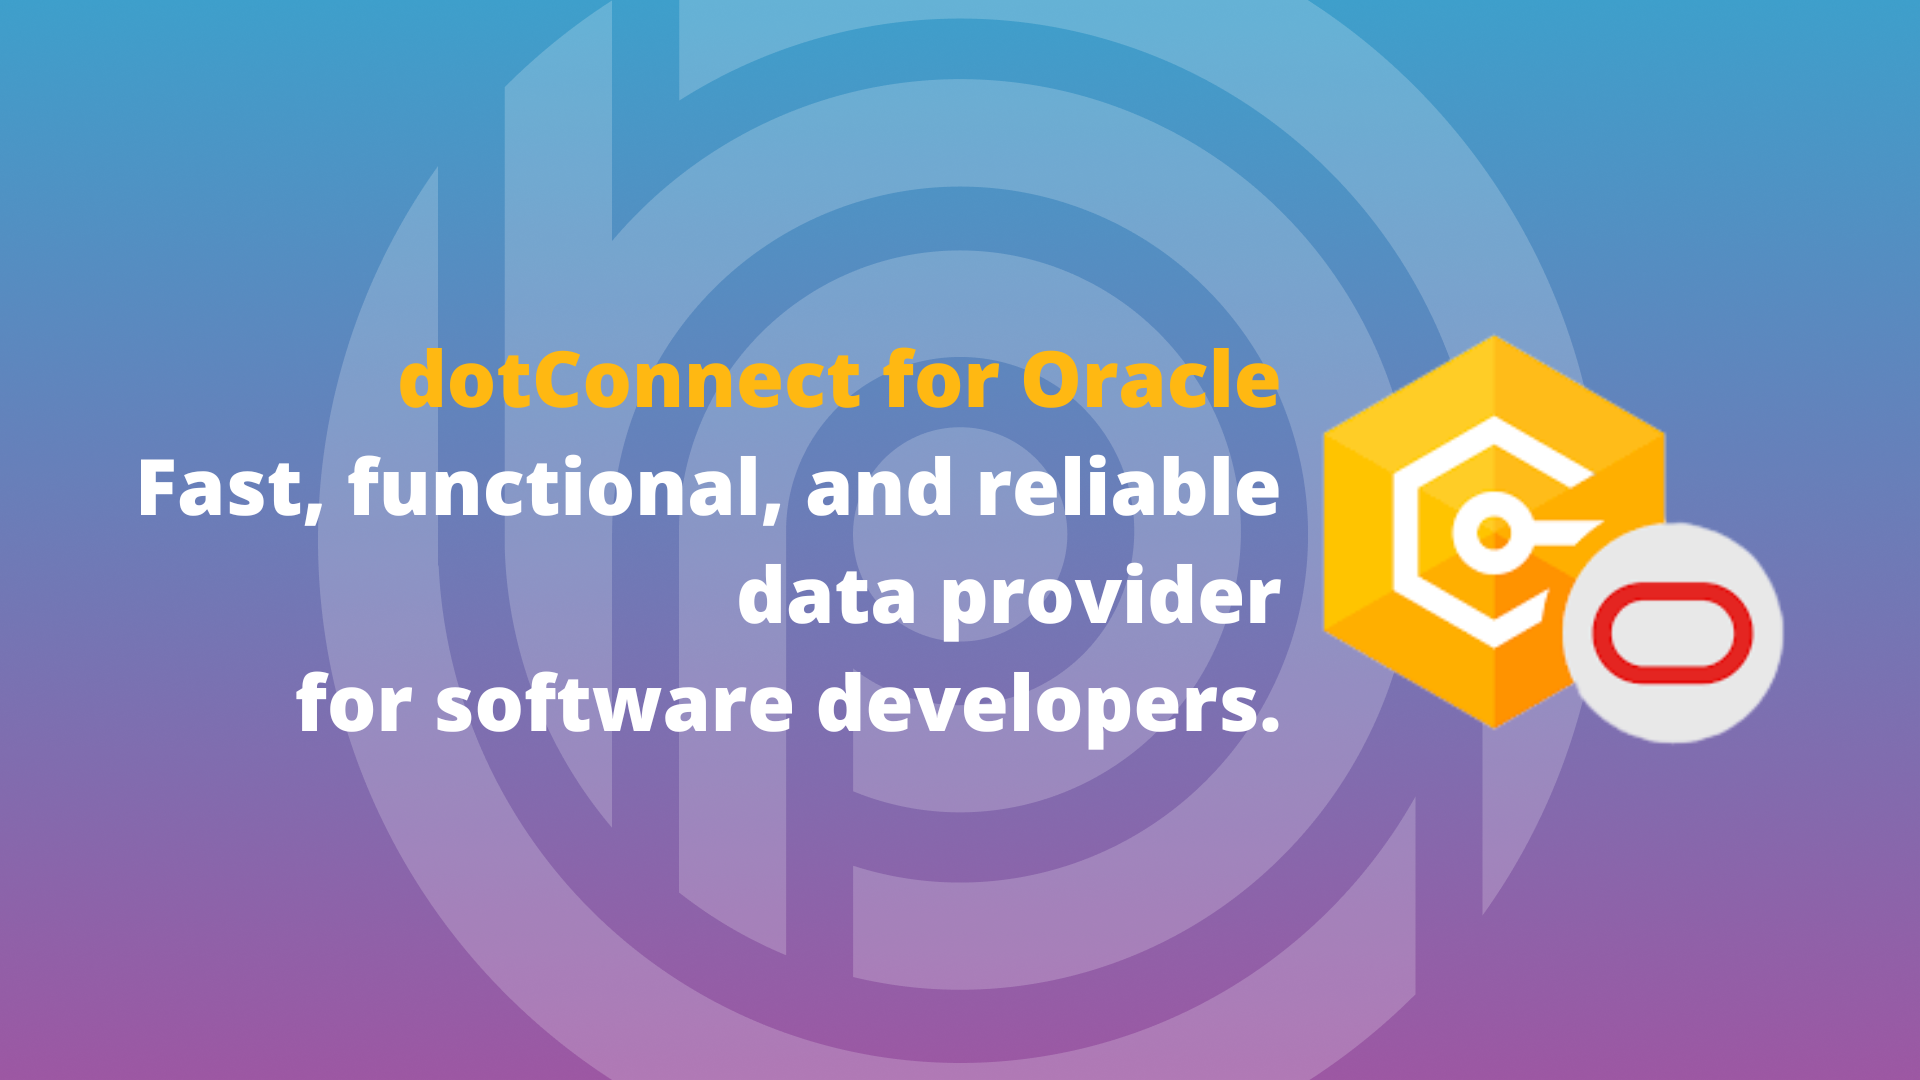 ADO.NET and dotConnect for Oracle | ABP Community